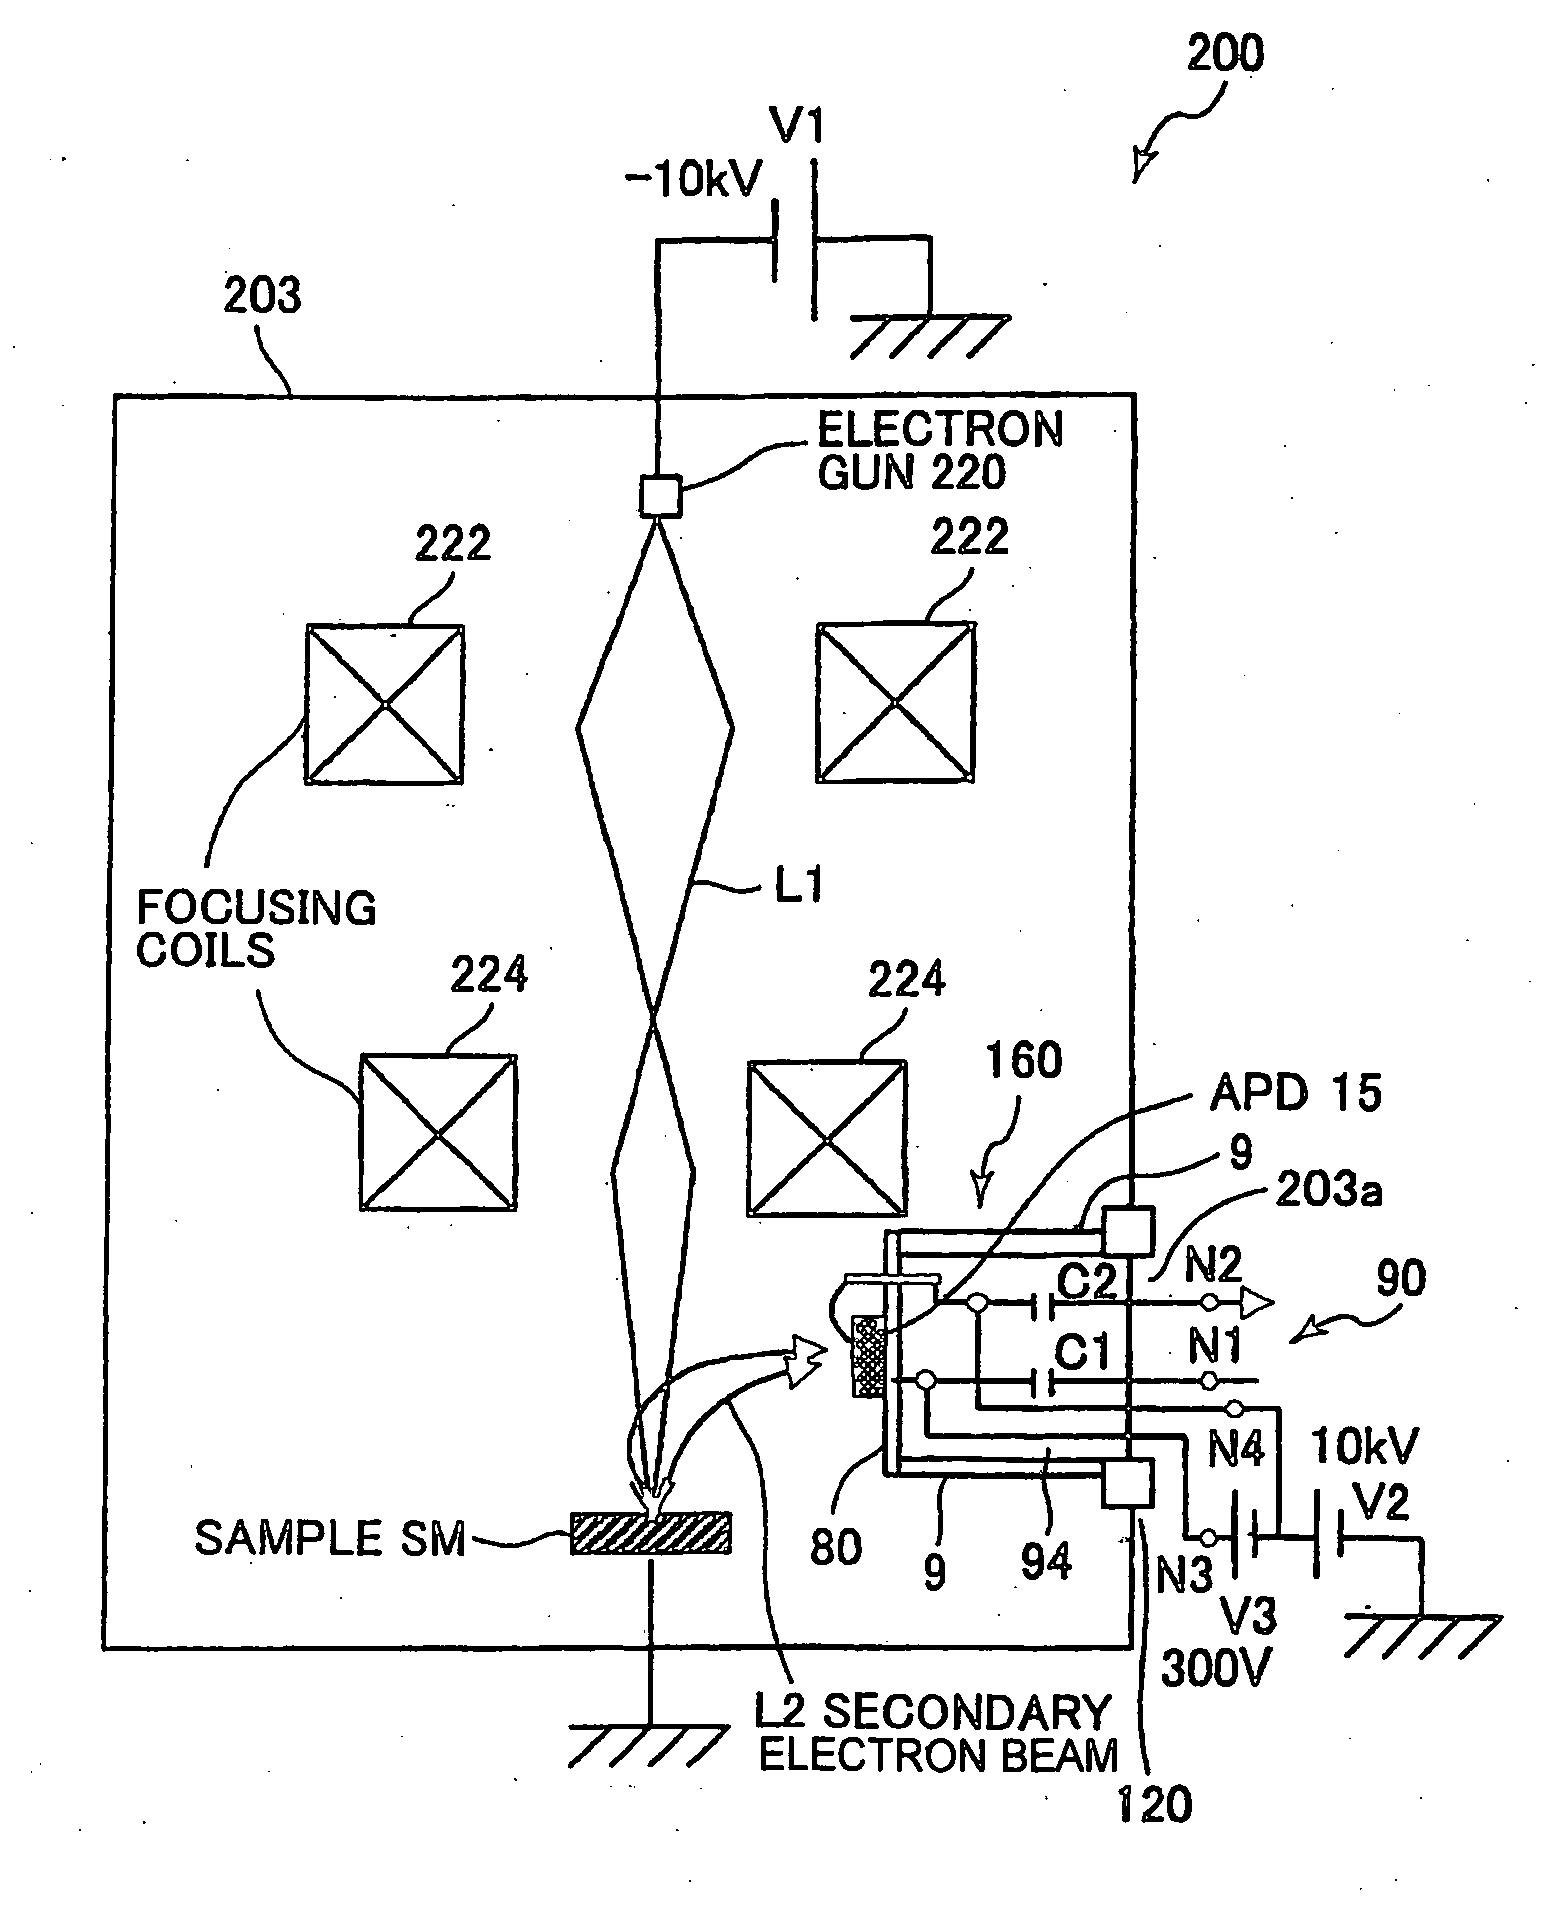 Electron beam detection device and electron tube